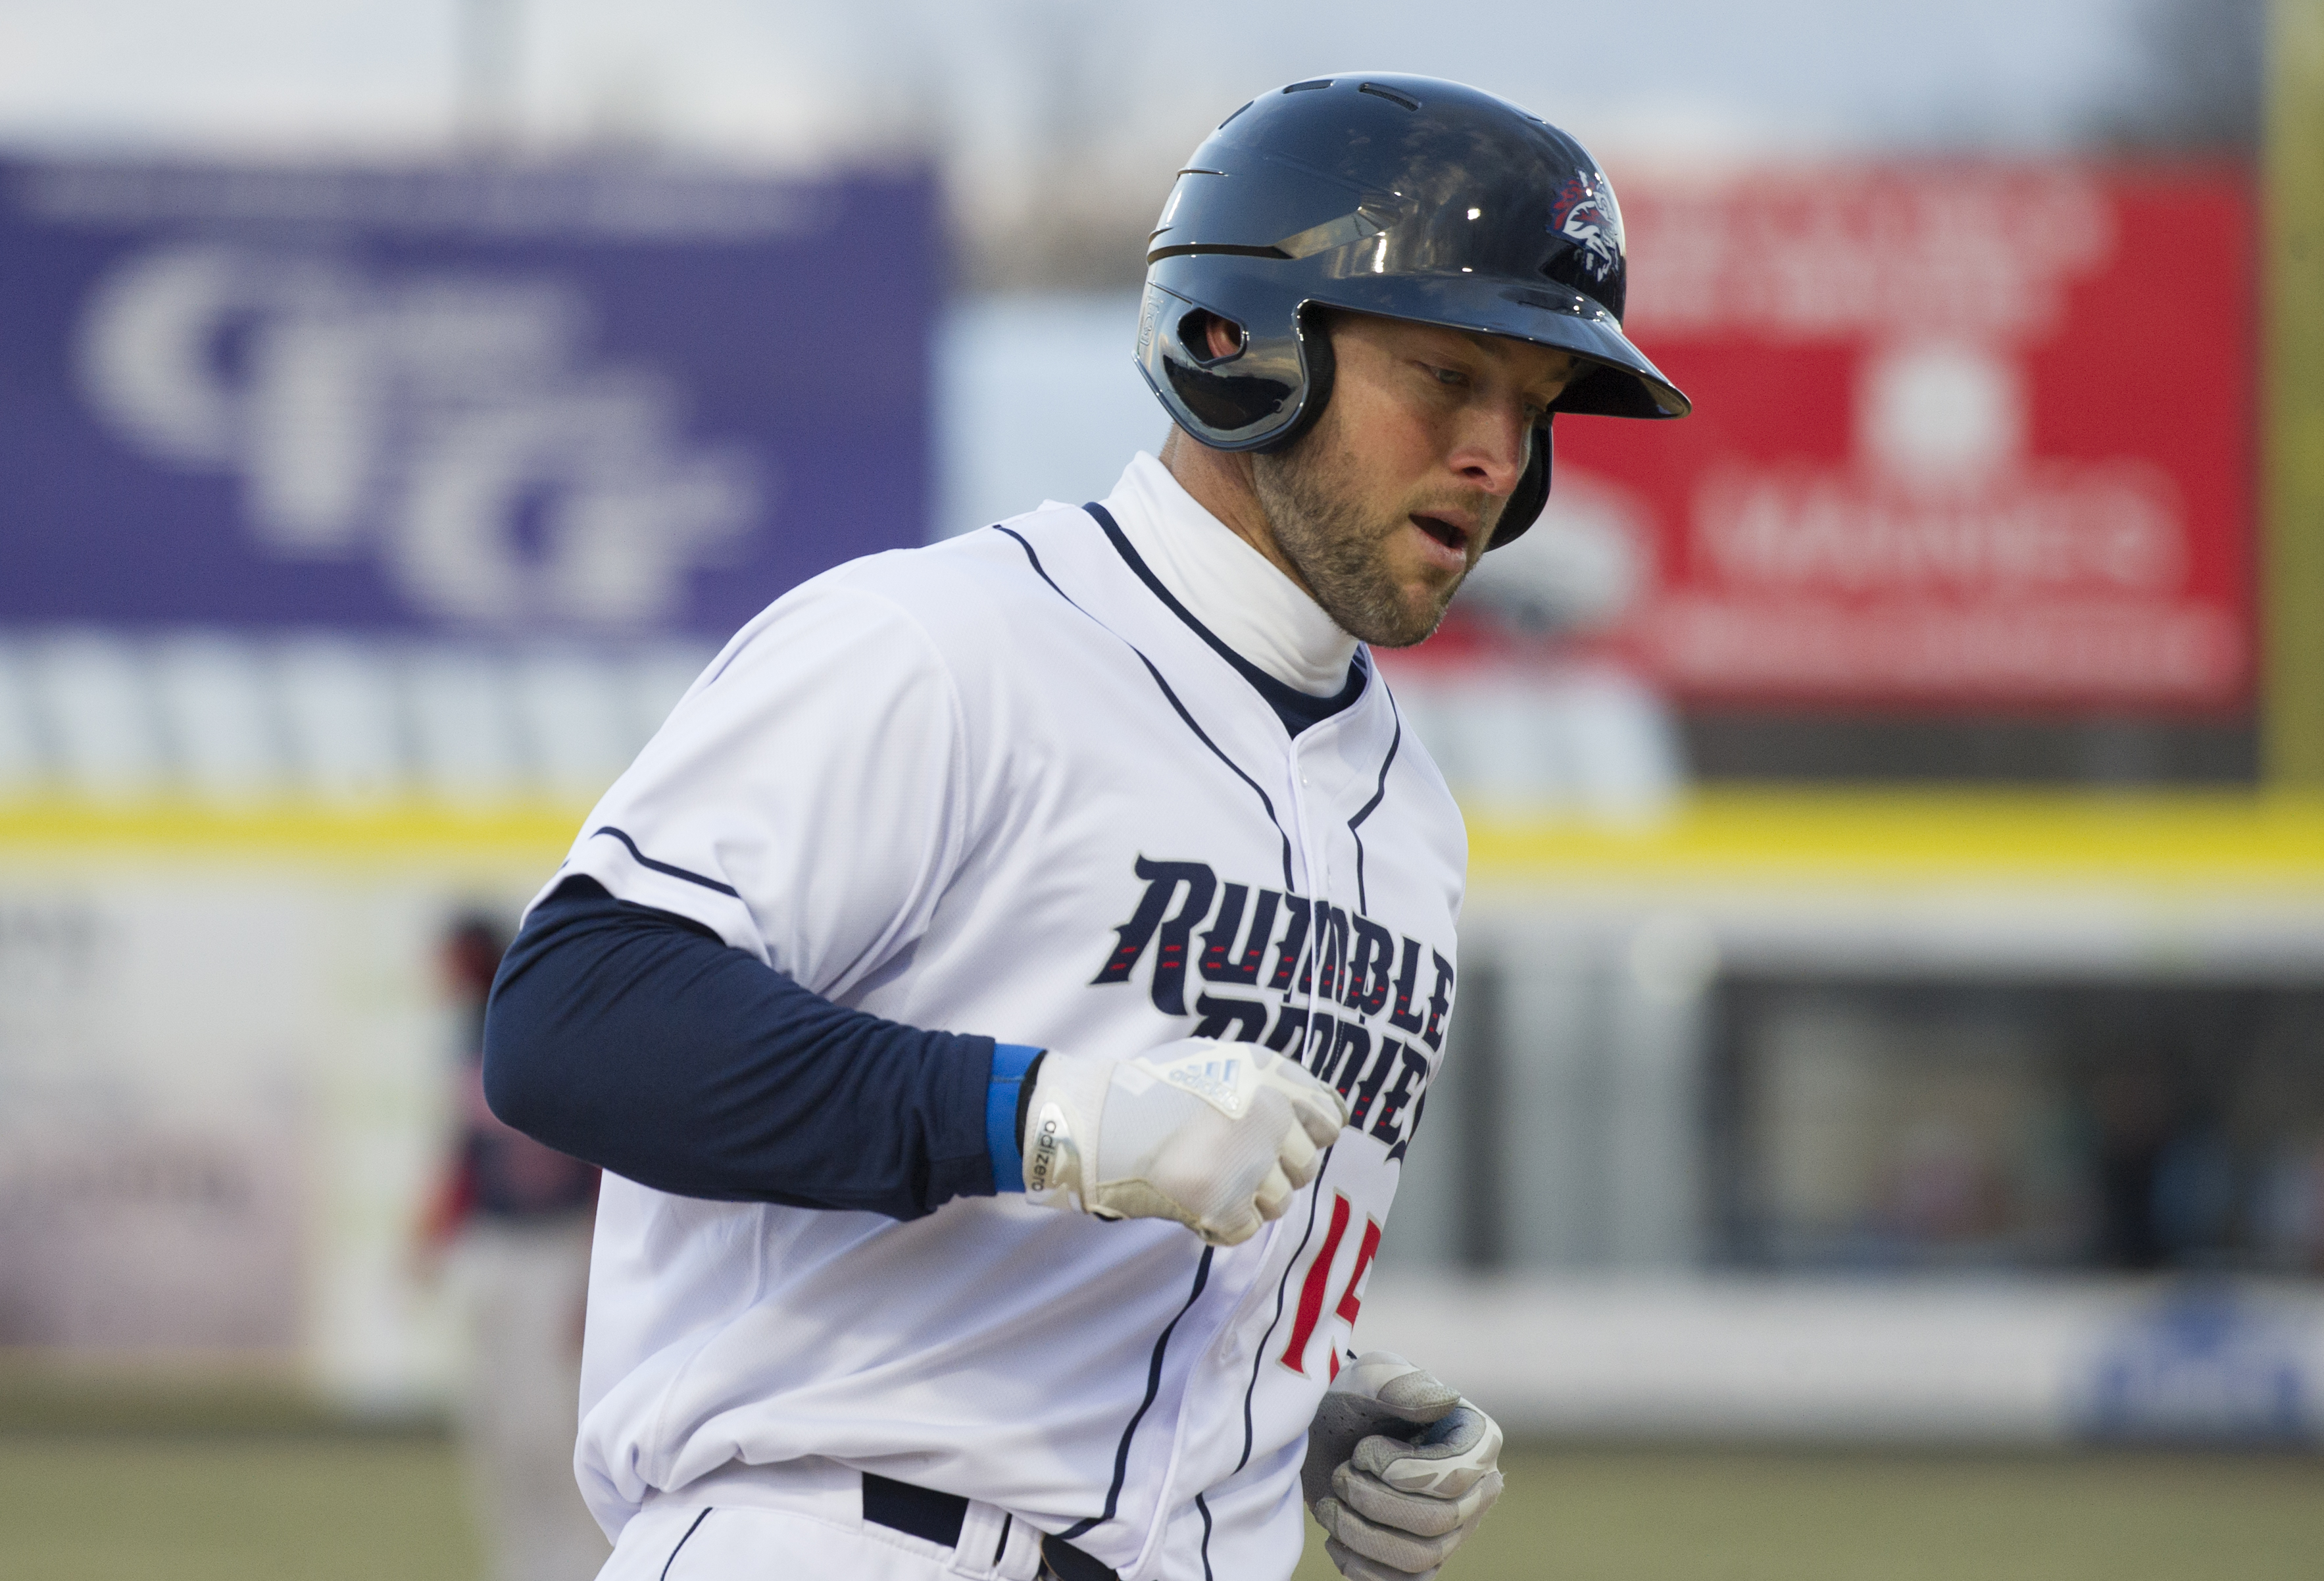 Sea Dogs overcome Tebow, Rumble Ponies